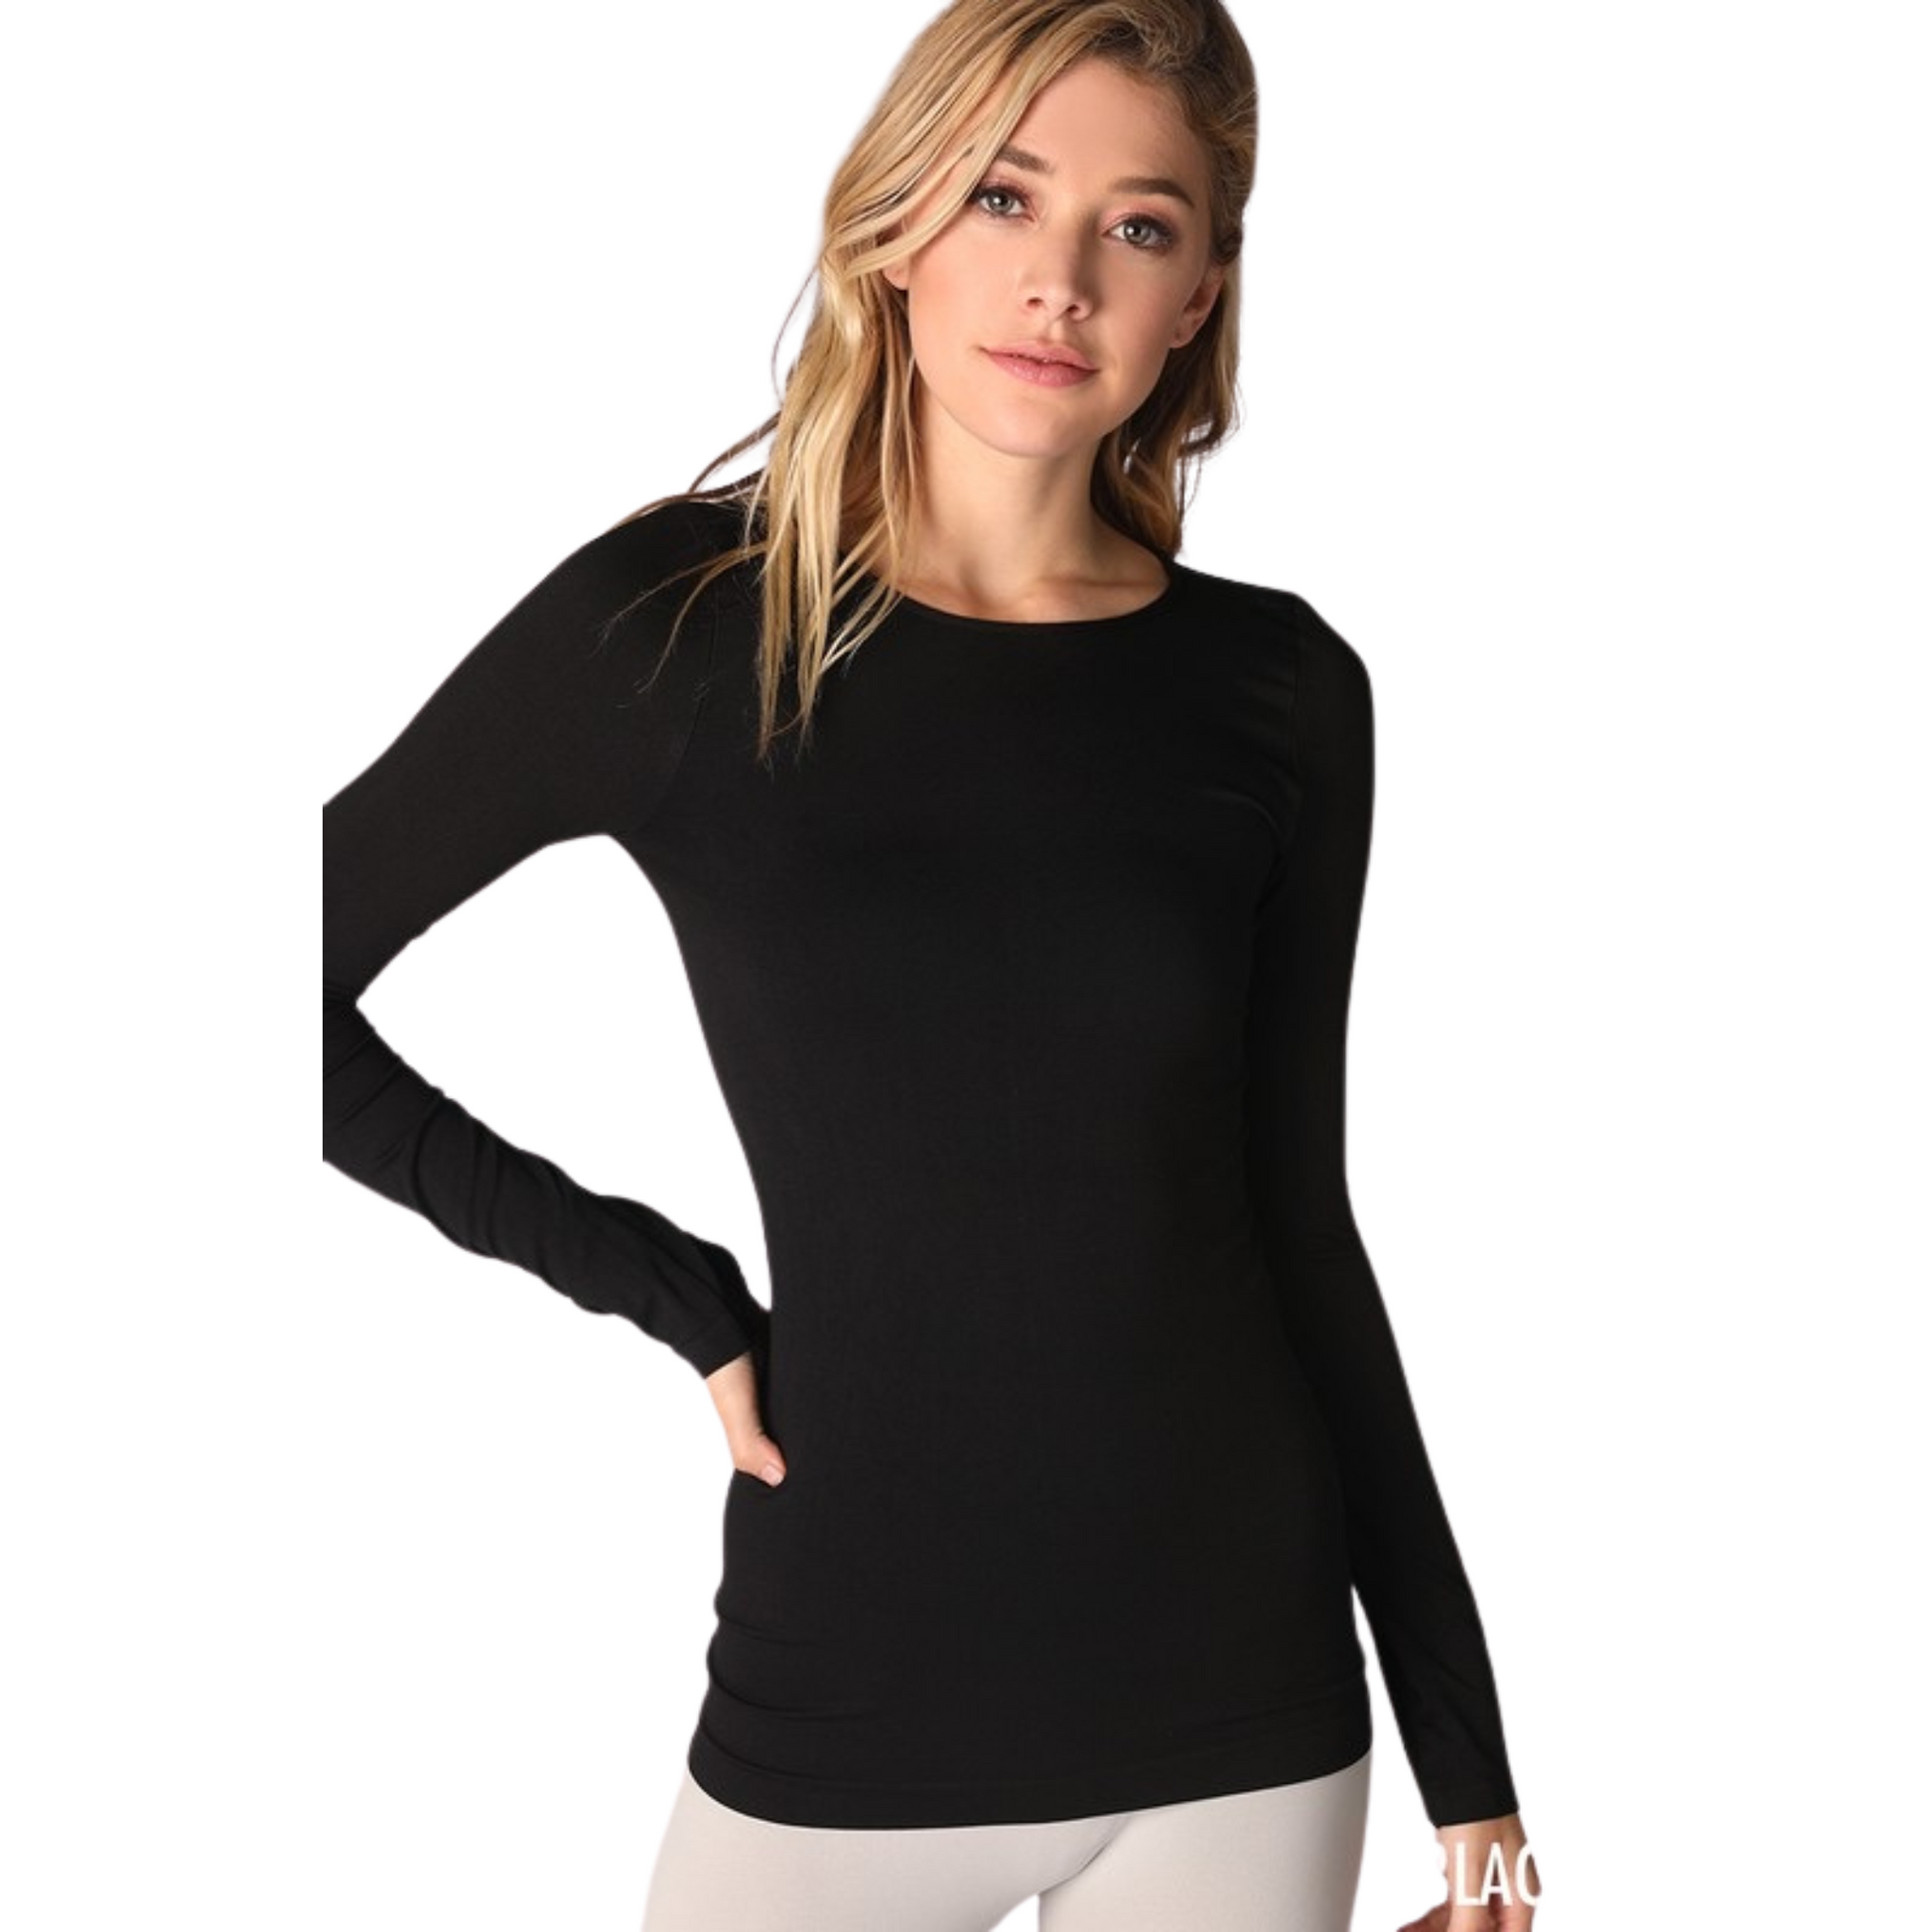 This fitted long sleeve shirt from Nikibiki is perfect for any occasion. With a wide neckline and a variety of colors available, this shirt is both comfortable and stylish. The fitted design ensures that the shirt flatters the figure.